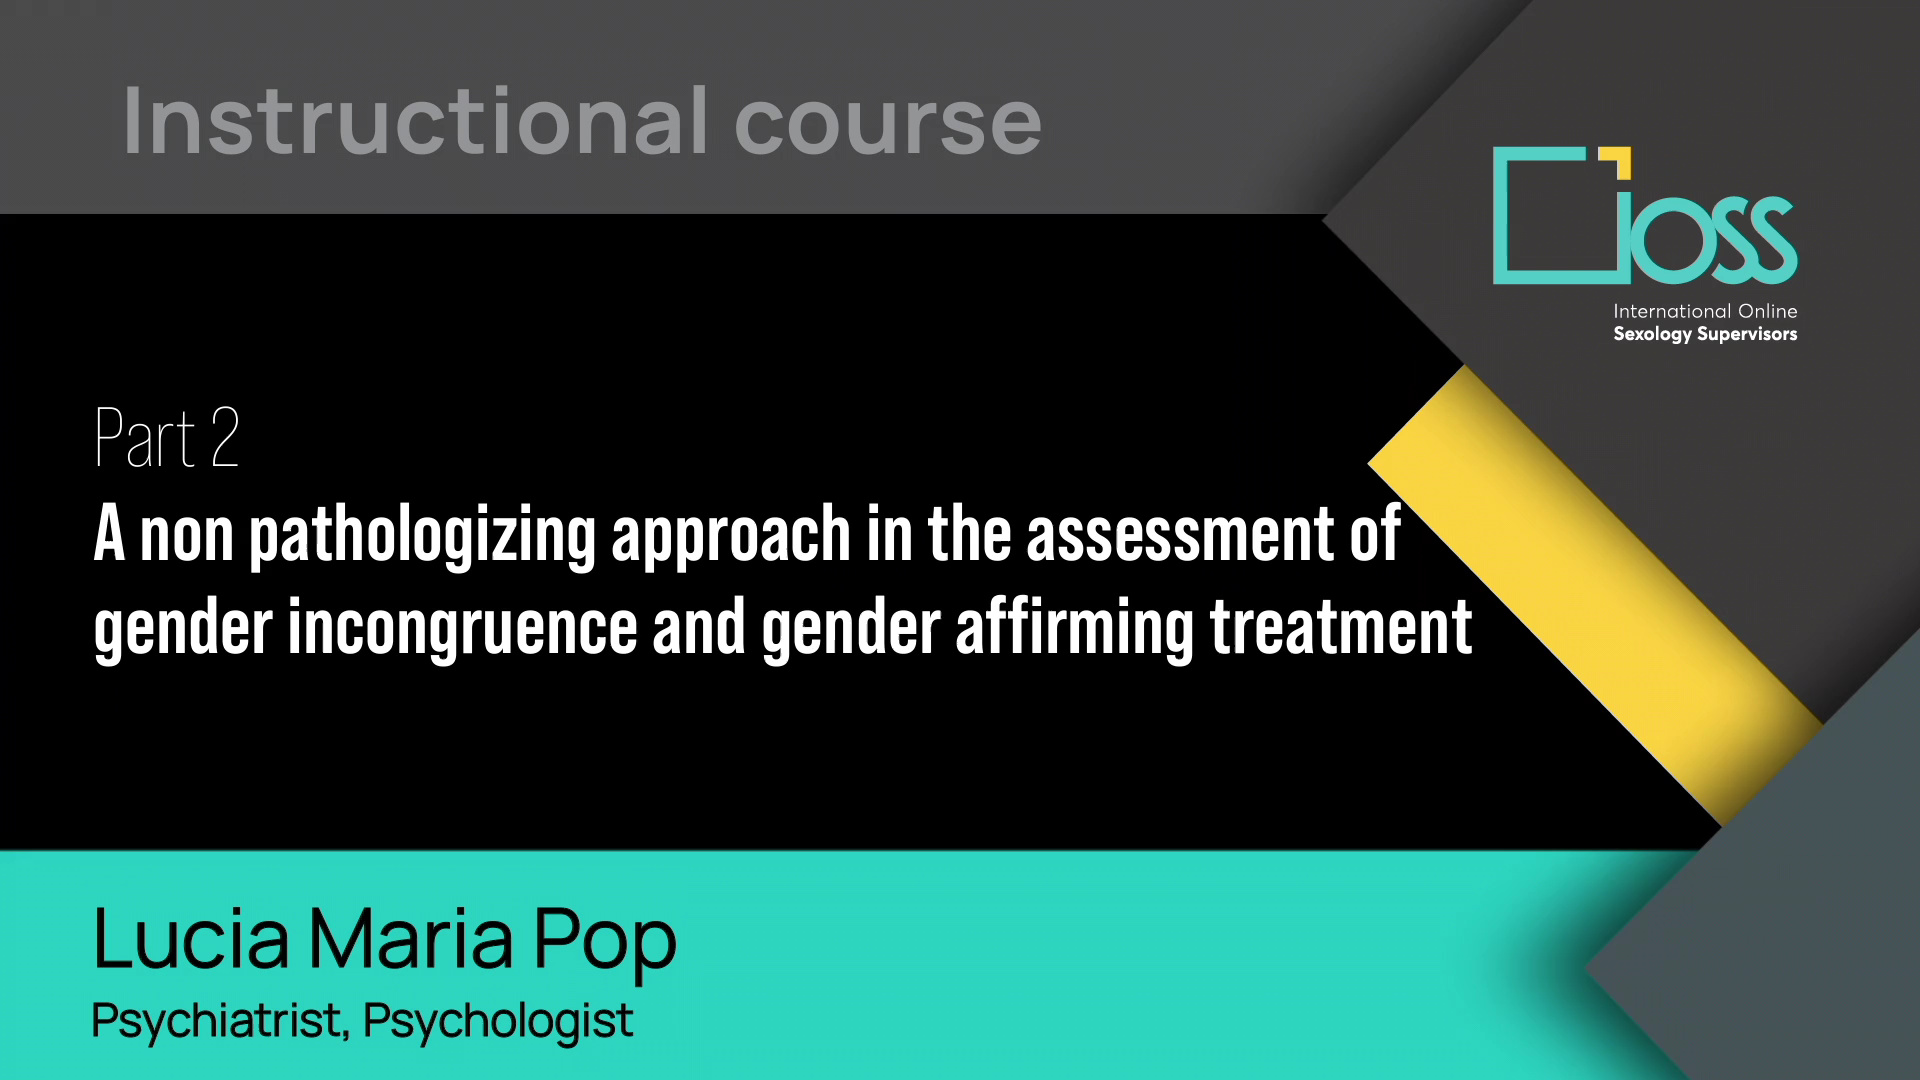 Part 2 A non pathologizing approach in the assessment of gender incongruence and gender affirming treatment (Part 1 & 2)